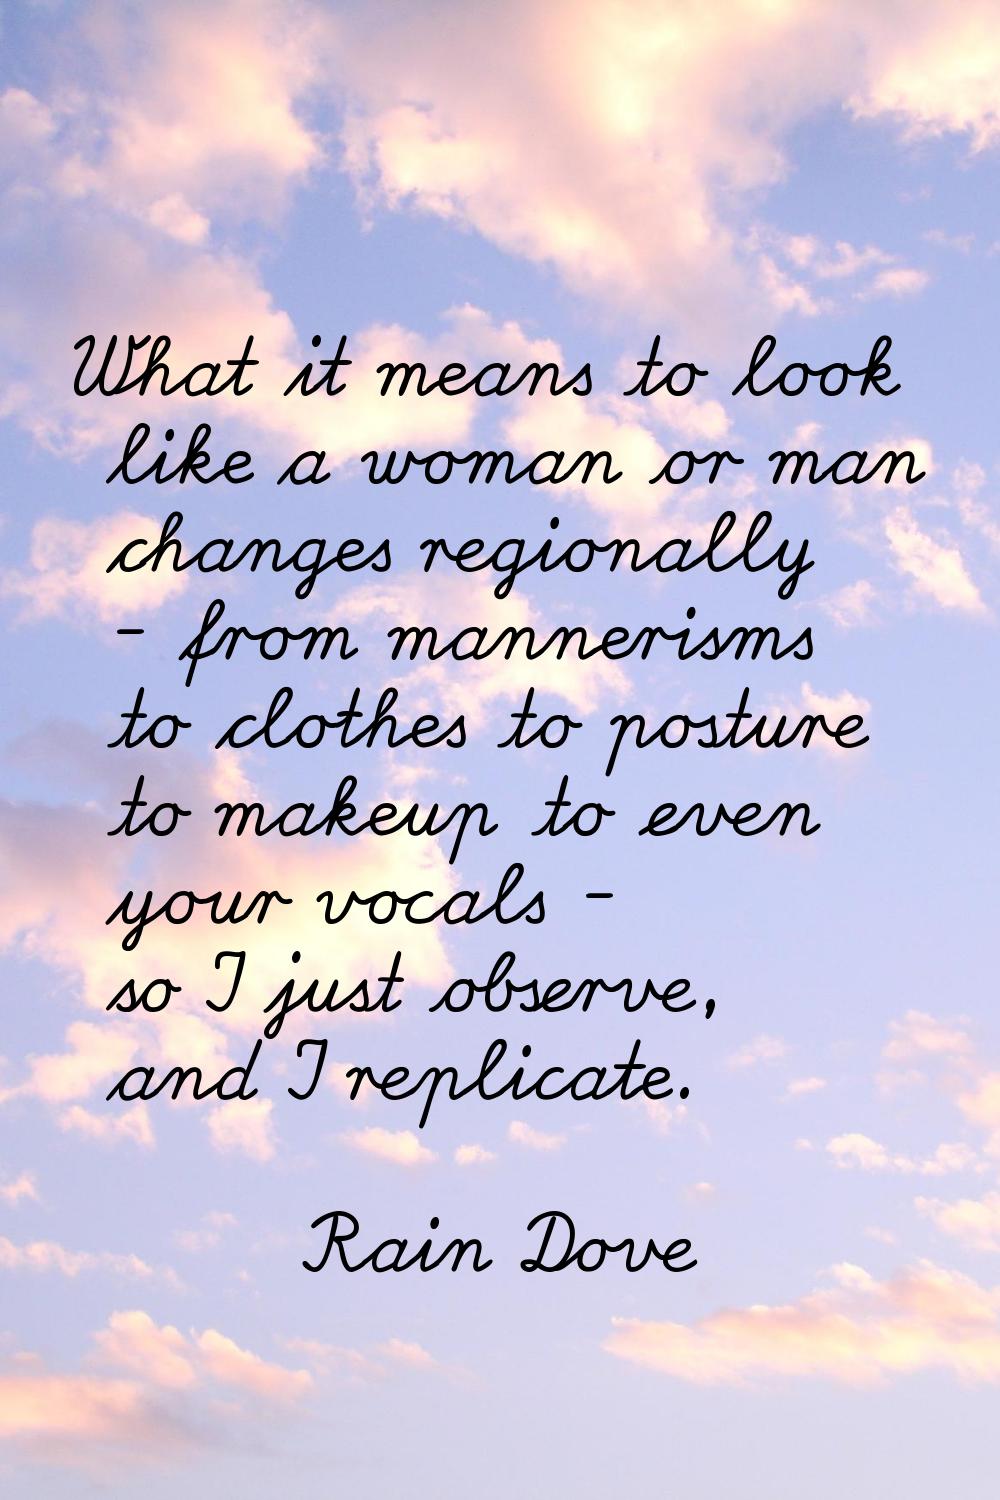 What it means to look like a woman or man changes regionally - from mannerisms to clothes to postur